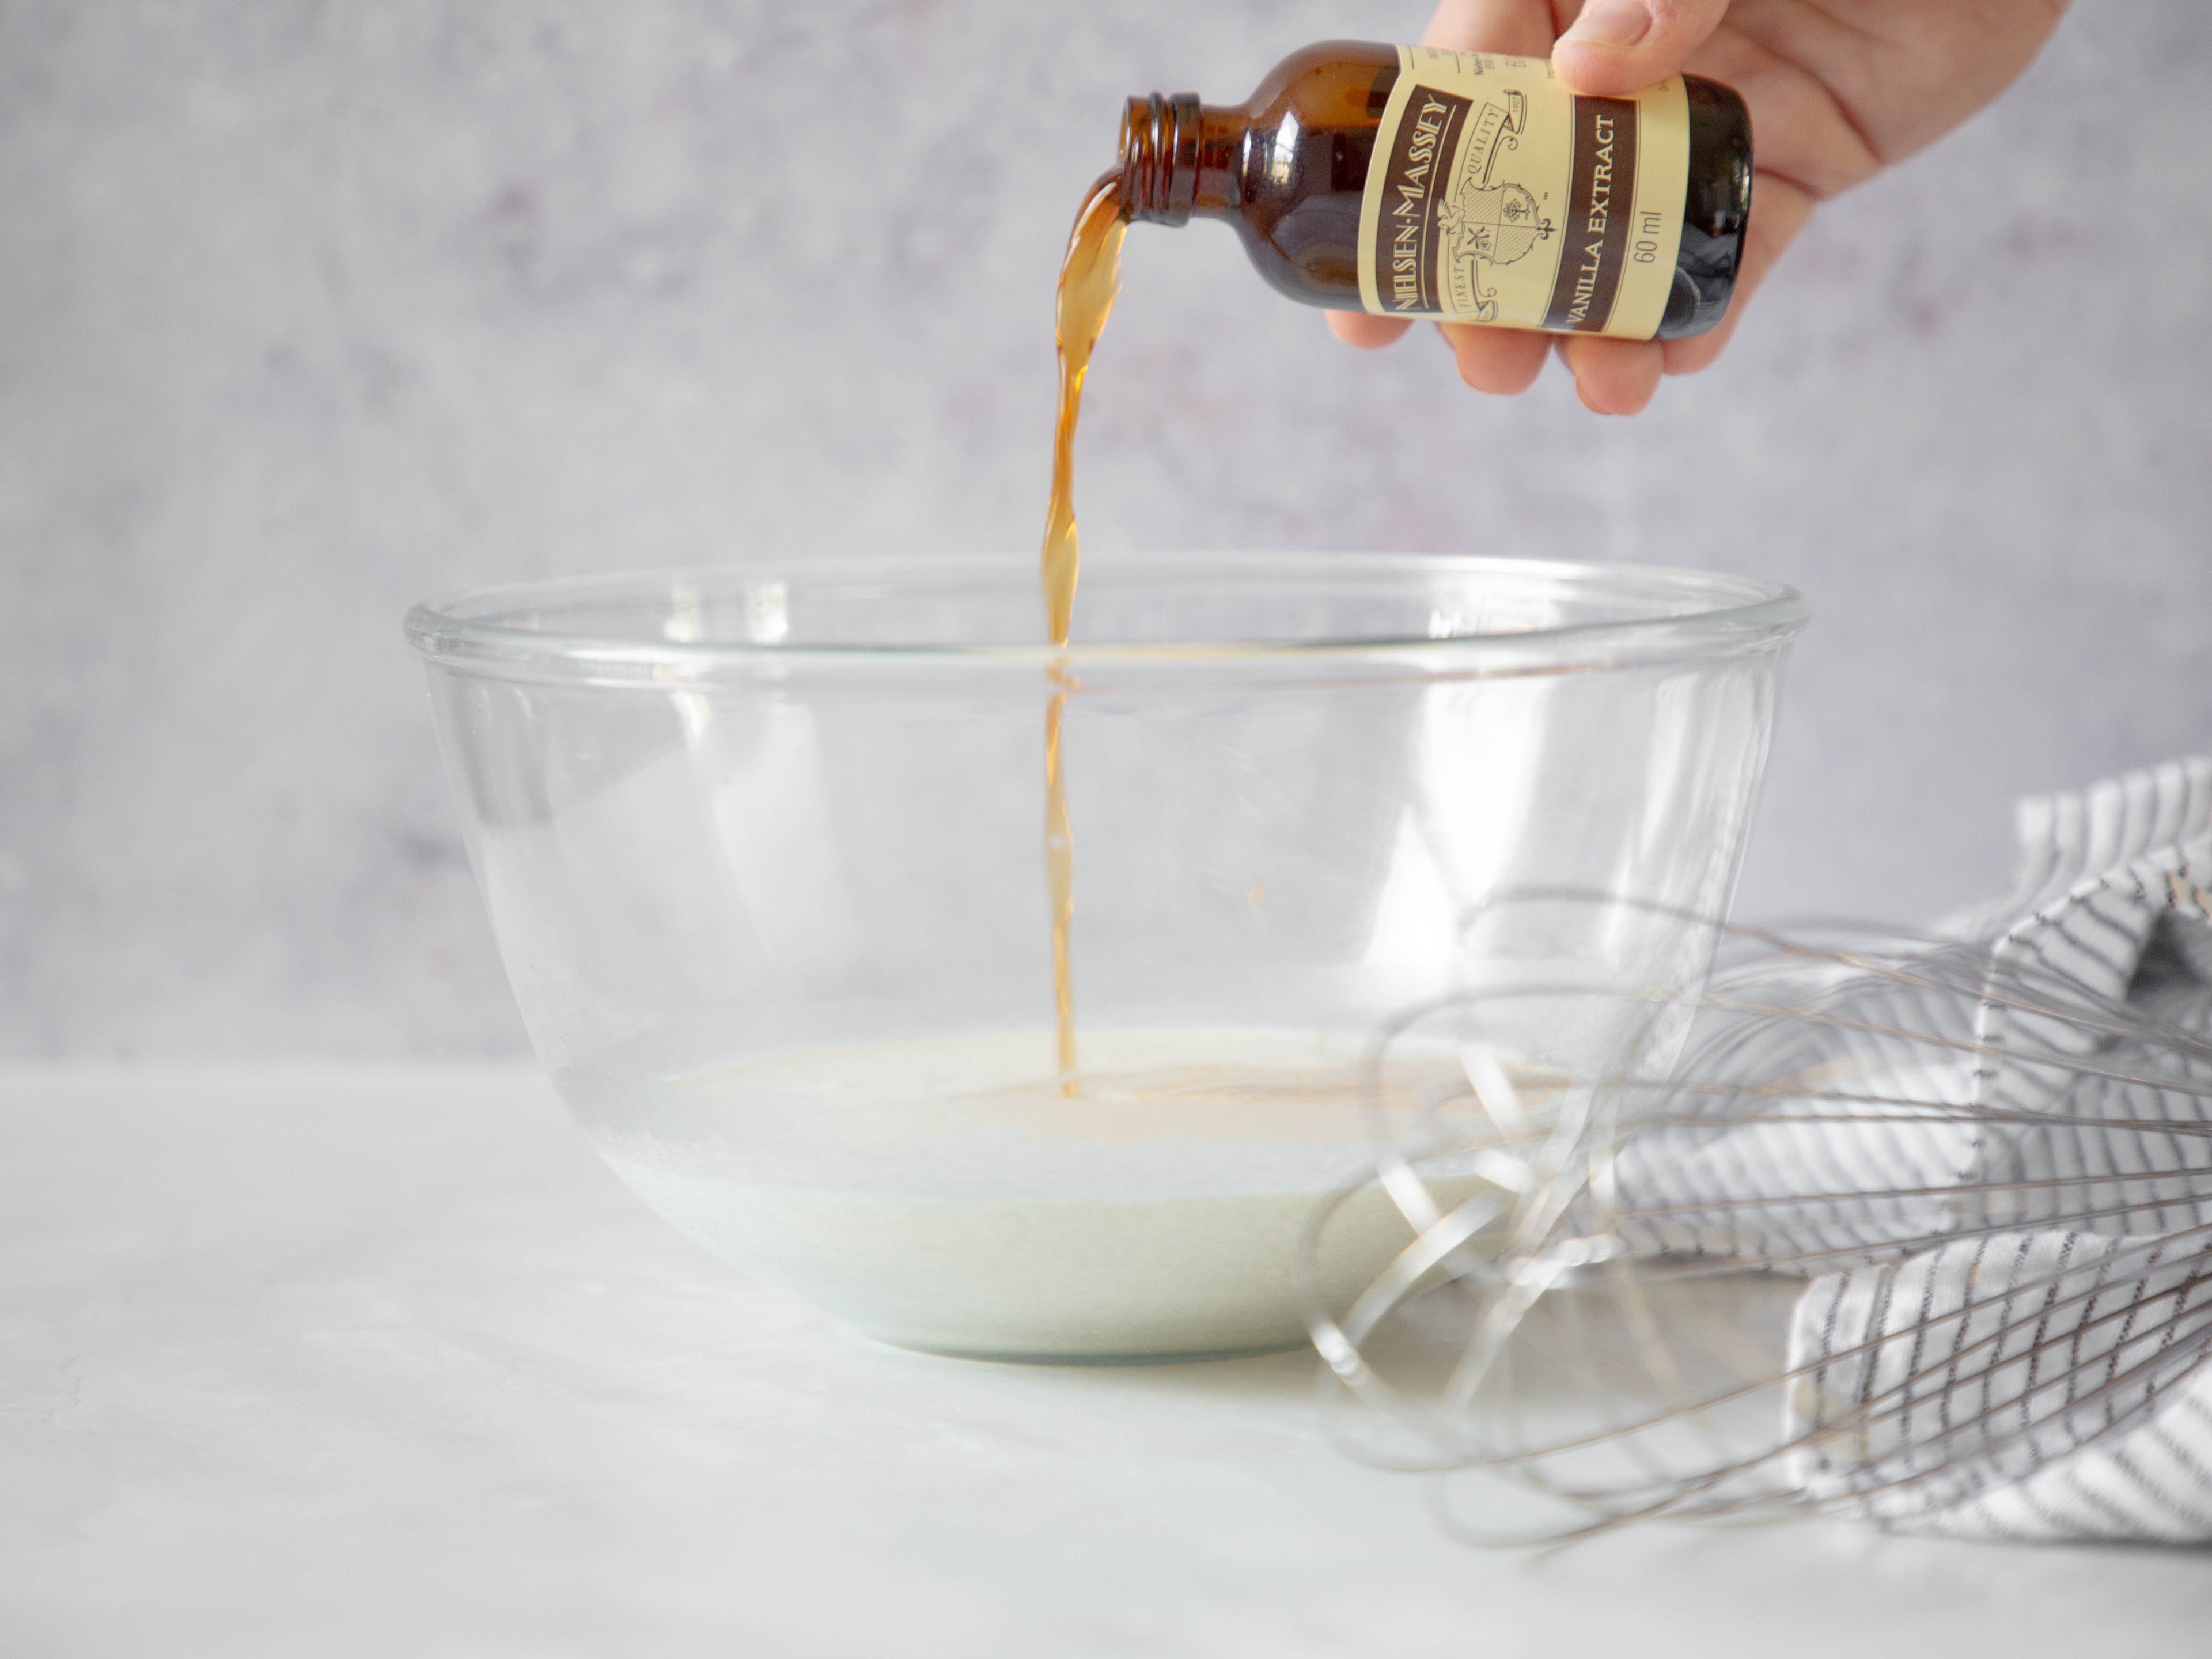 Hand pouring a bottle of vanilla extract into a glass bowl with a whisk and tea towel in the forefront